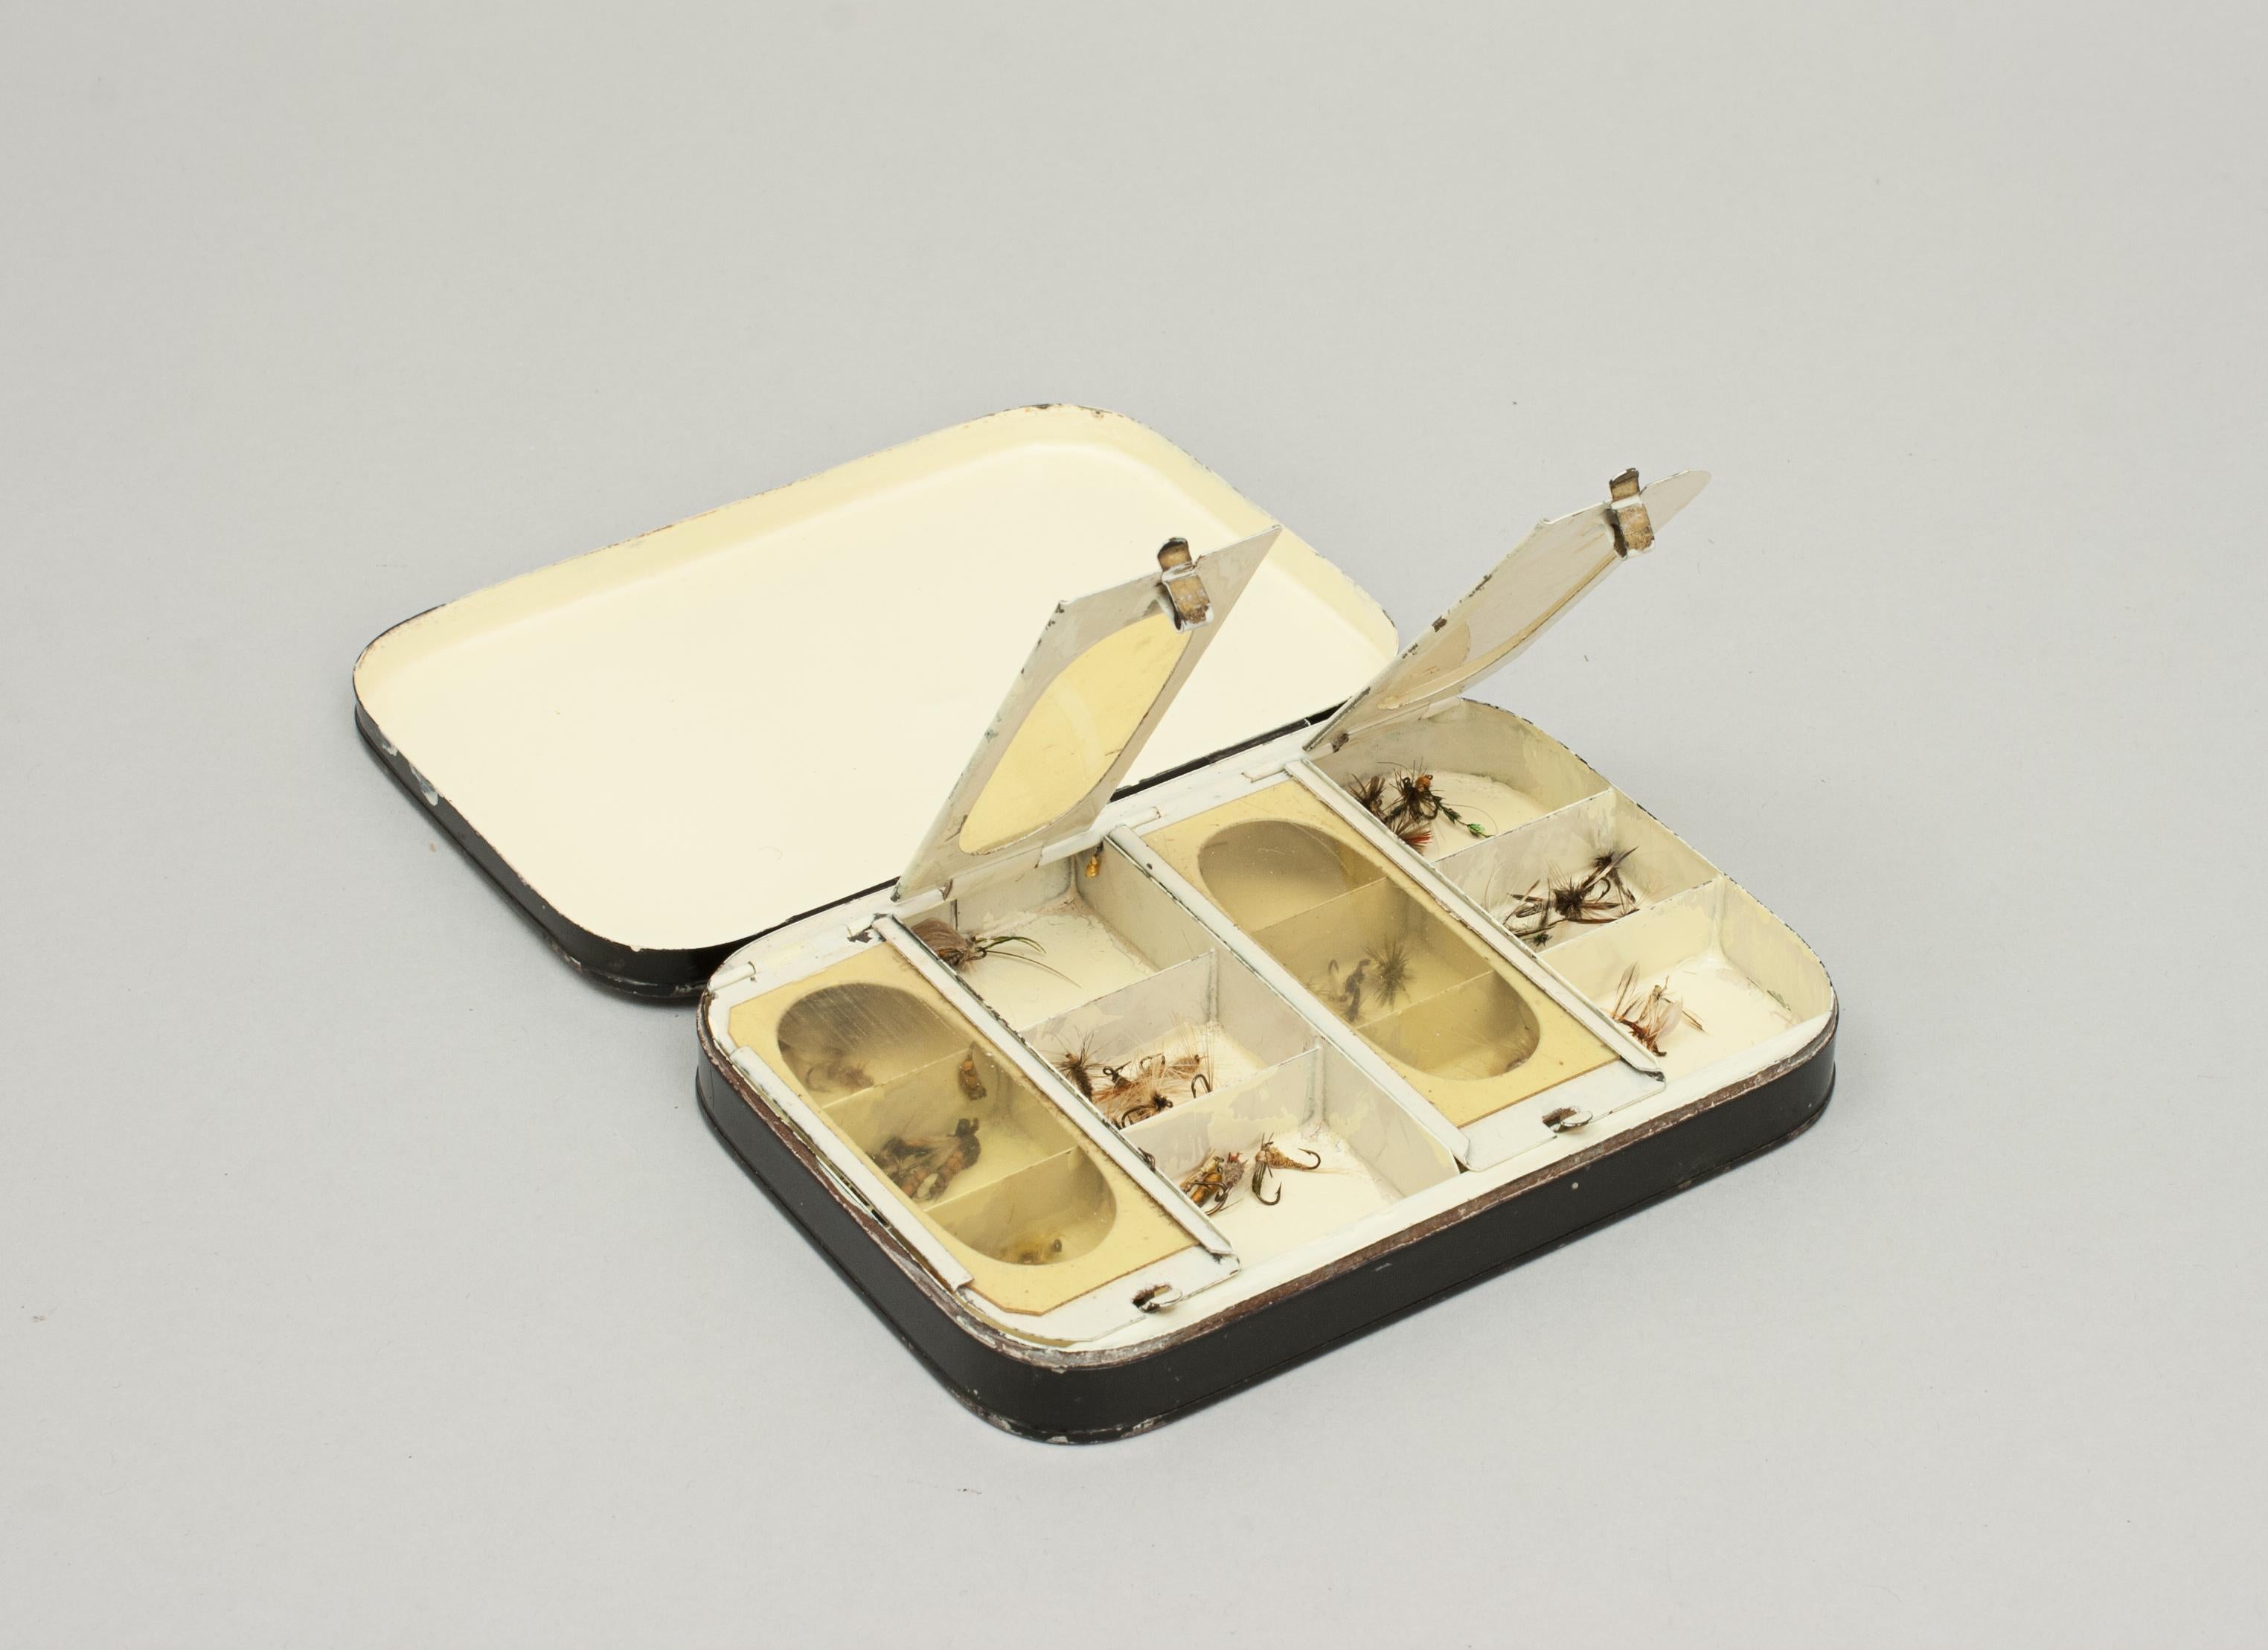 Vintage black Japanned dry fly fishing box.
A black japanned tin fly box with cream interior and four compartments with transparent celluloid lids so that the flies inside may be seen. The lids with clasps to keep the windows closed, some of the